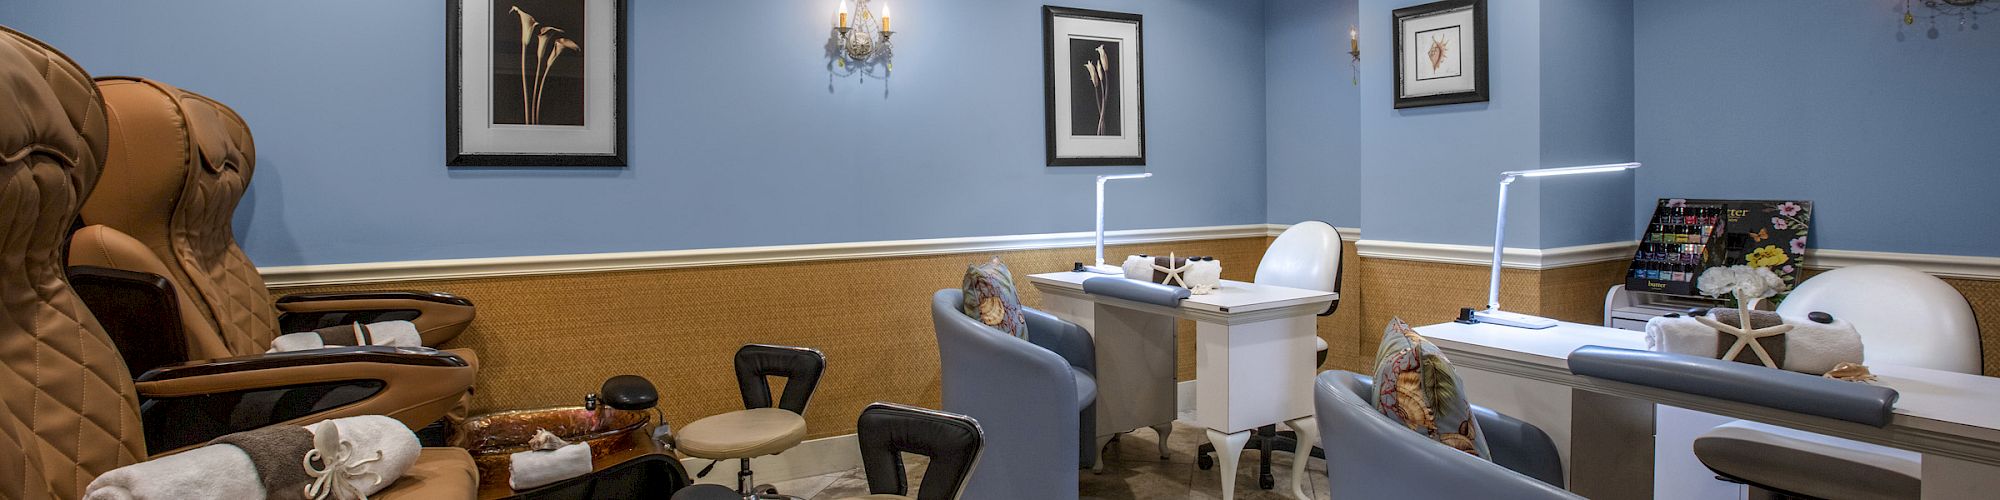 This image shows an interior of a nail salon with pedicure chairs, manicure stations, blue walls, framed artwork, and ceiling lights.